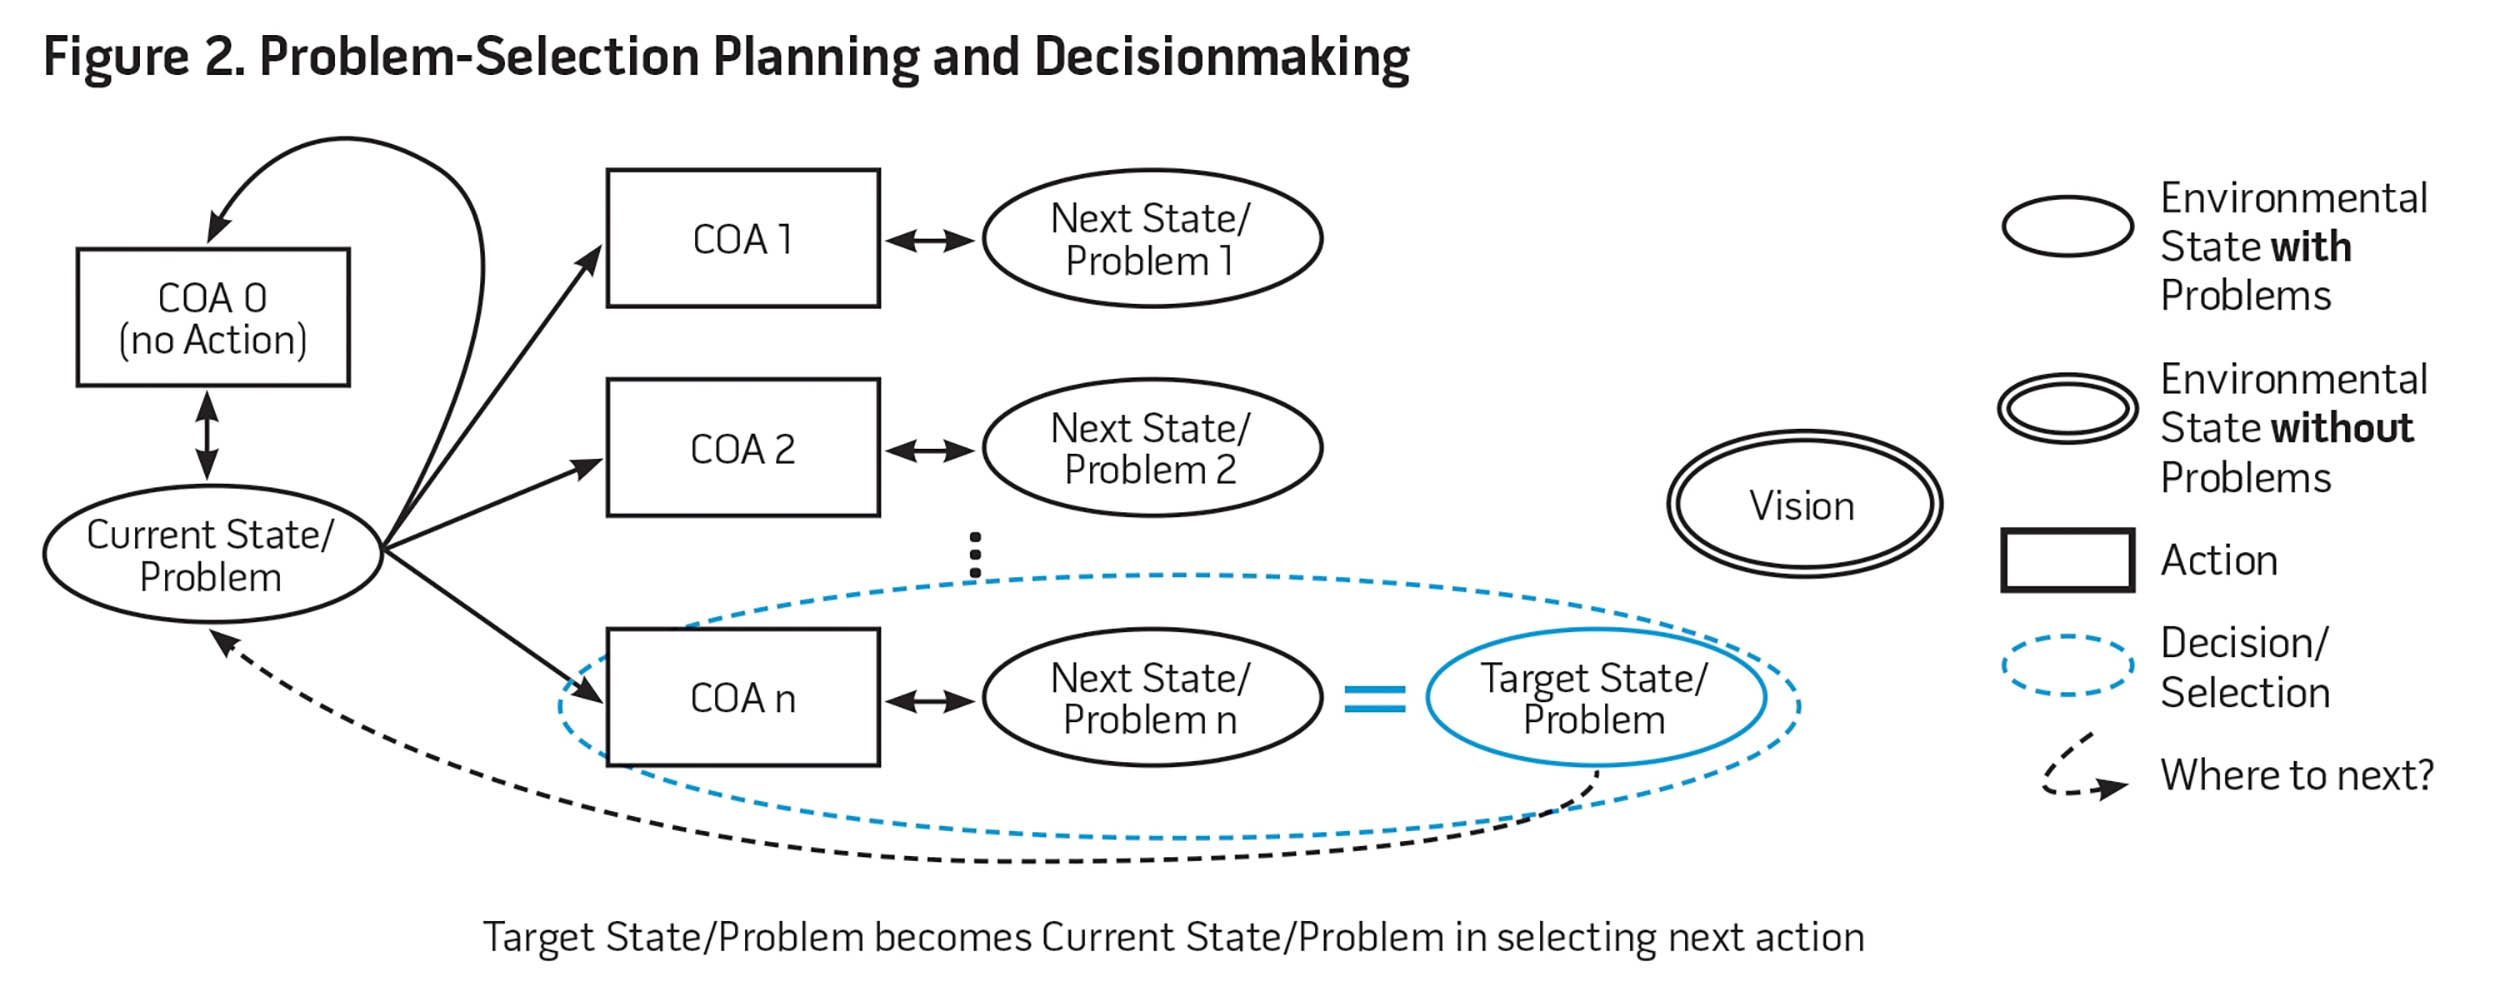 Figure 2. Problem-Selection Planning and Decisionmaking